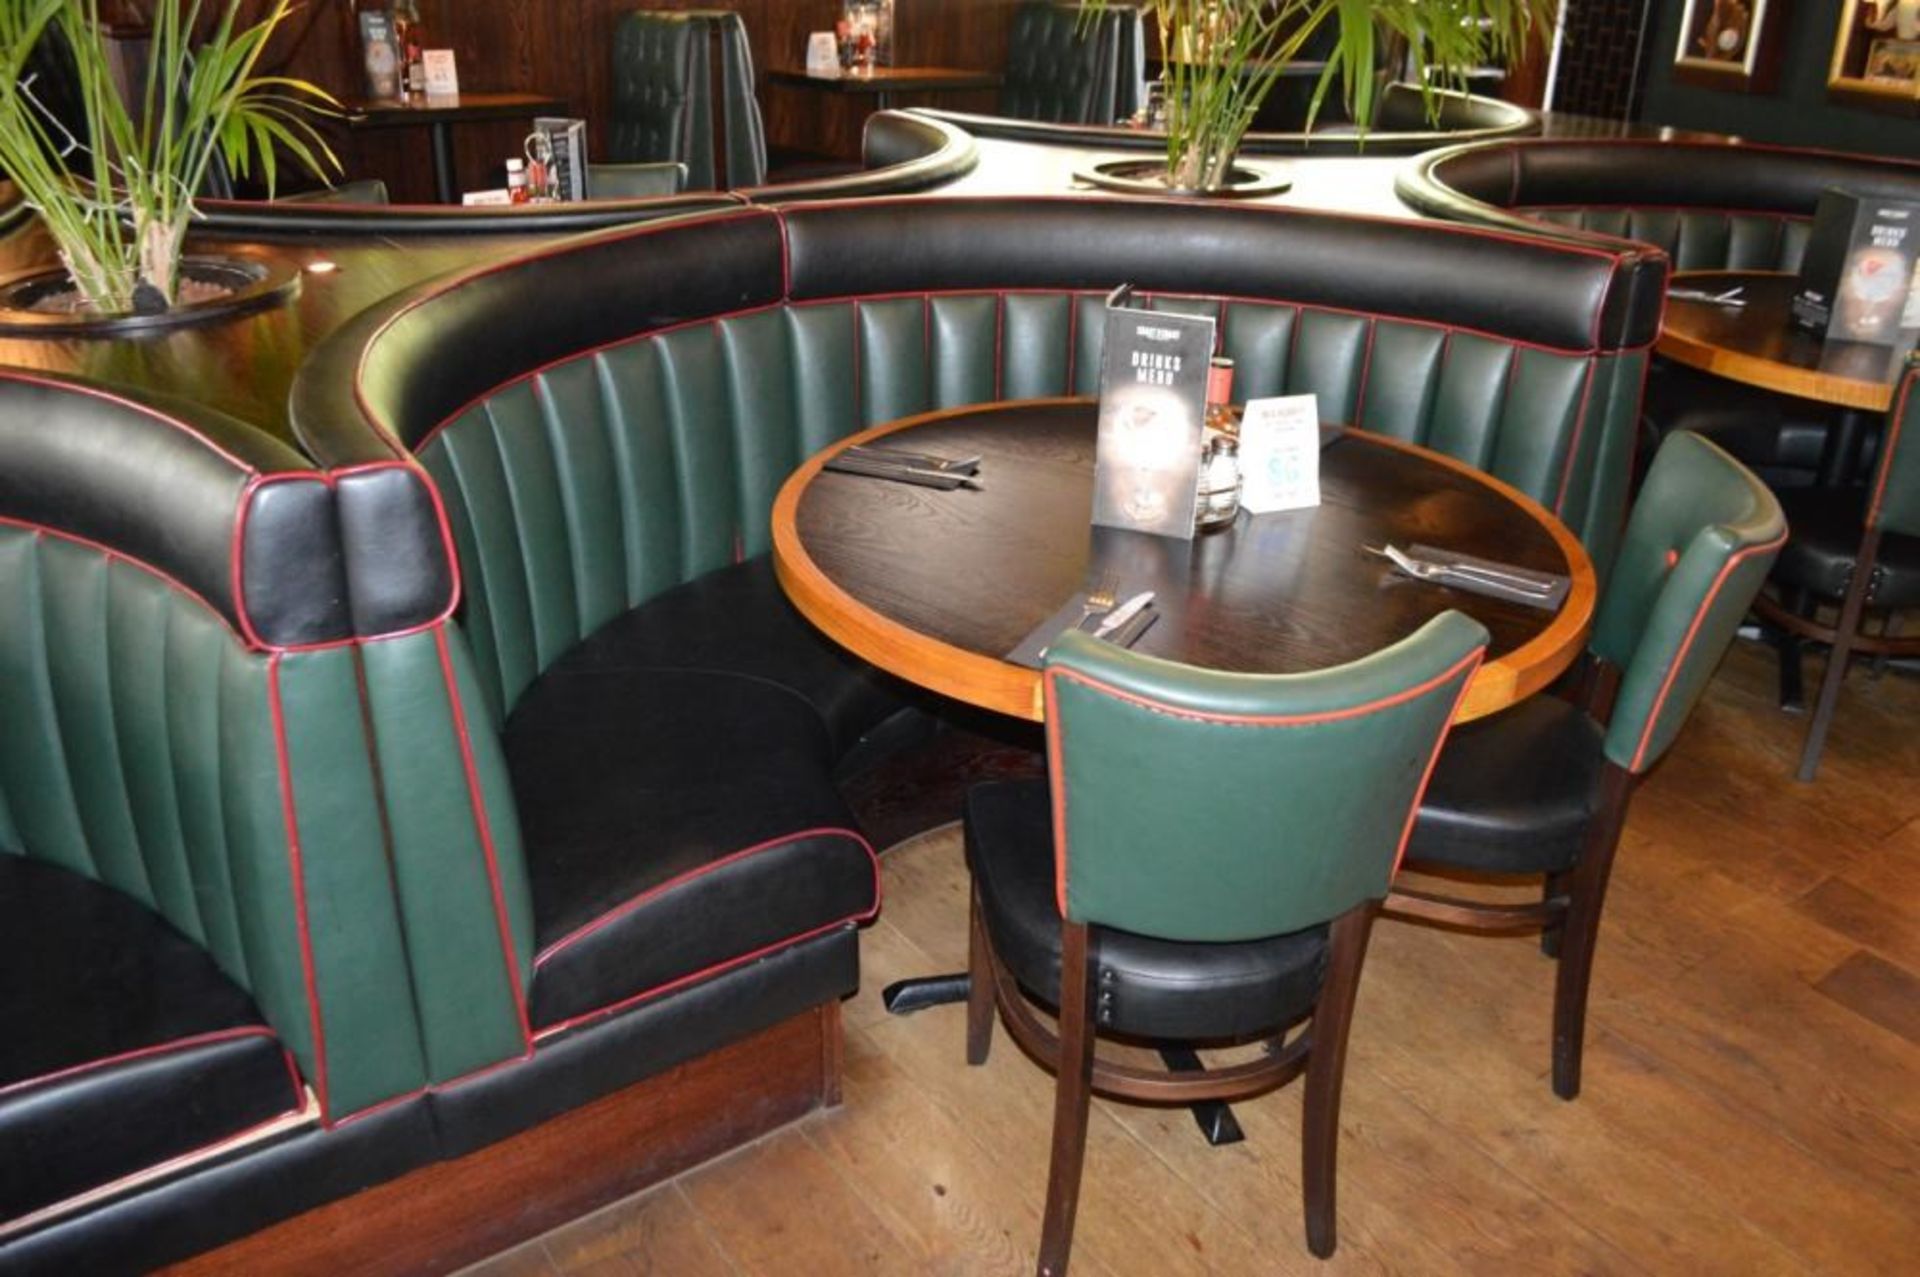 1 x Contemporary Half Circle Seating Booth - Features a Leather Upholstery in Green and Black, - Image 2 of 5